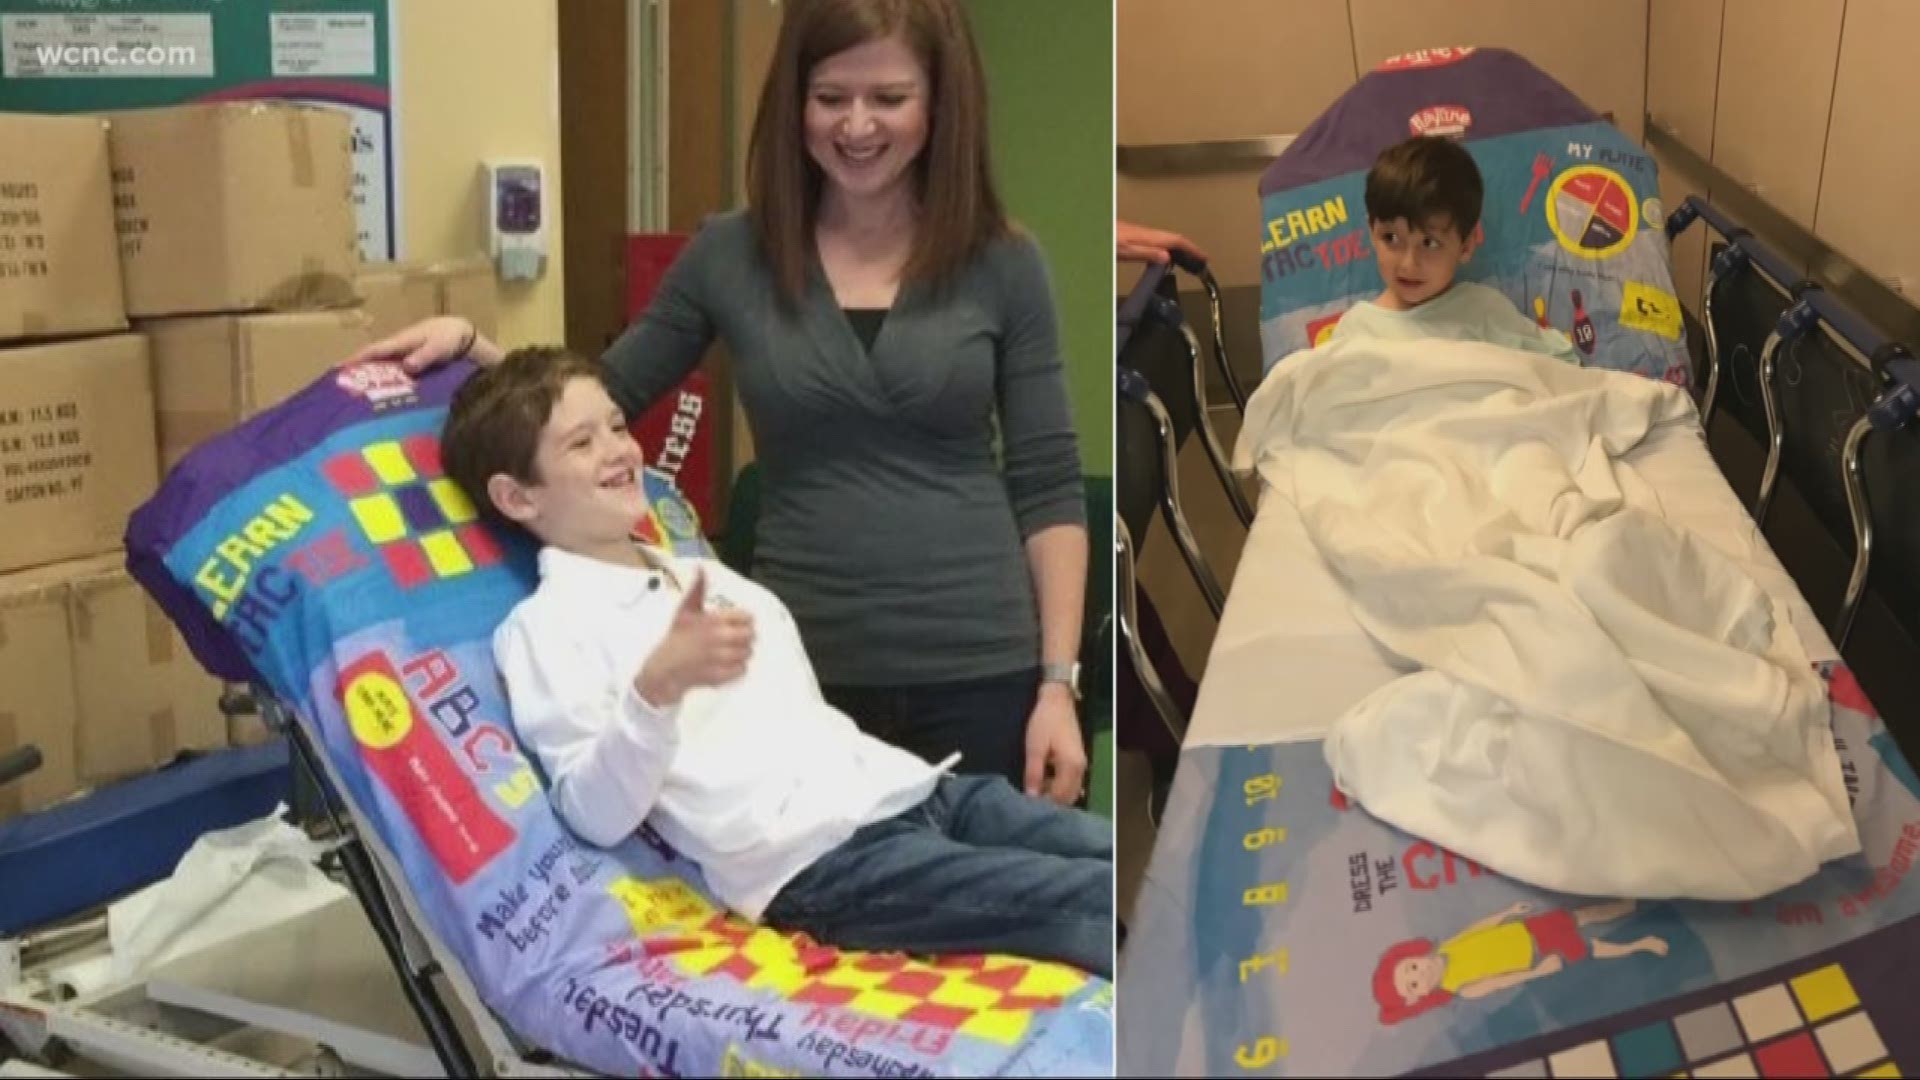 Kevin Gaitlin had the idea for play therapy sheets after visiting a friend's son in the hospital. The sheets help to preoccupy, learn and entertain children.